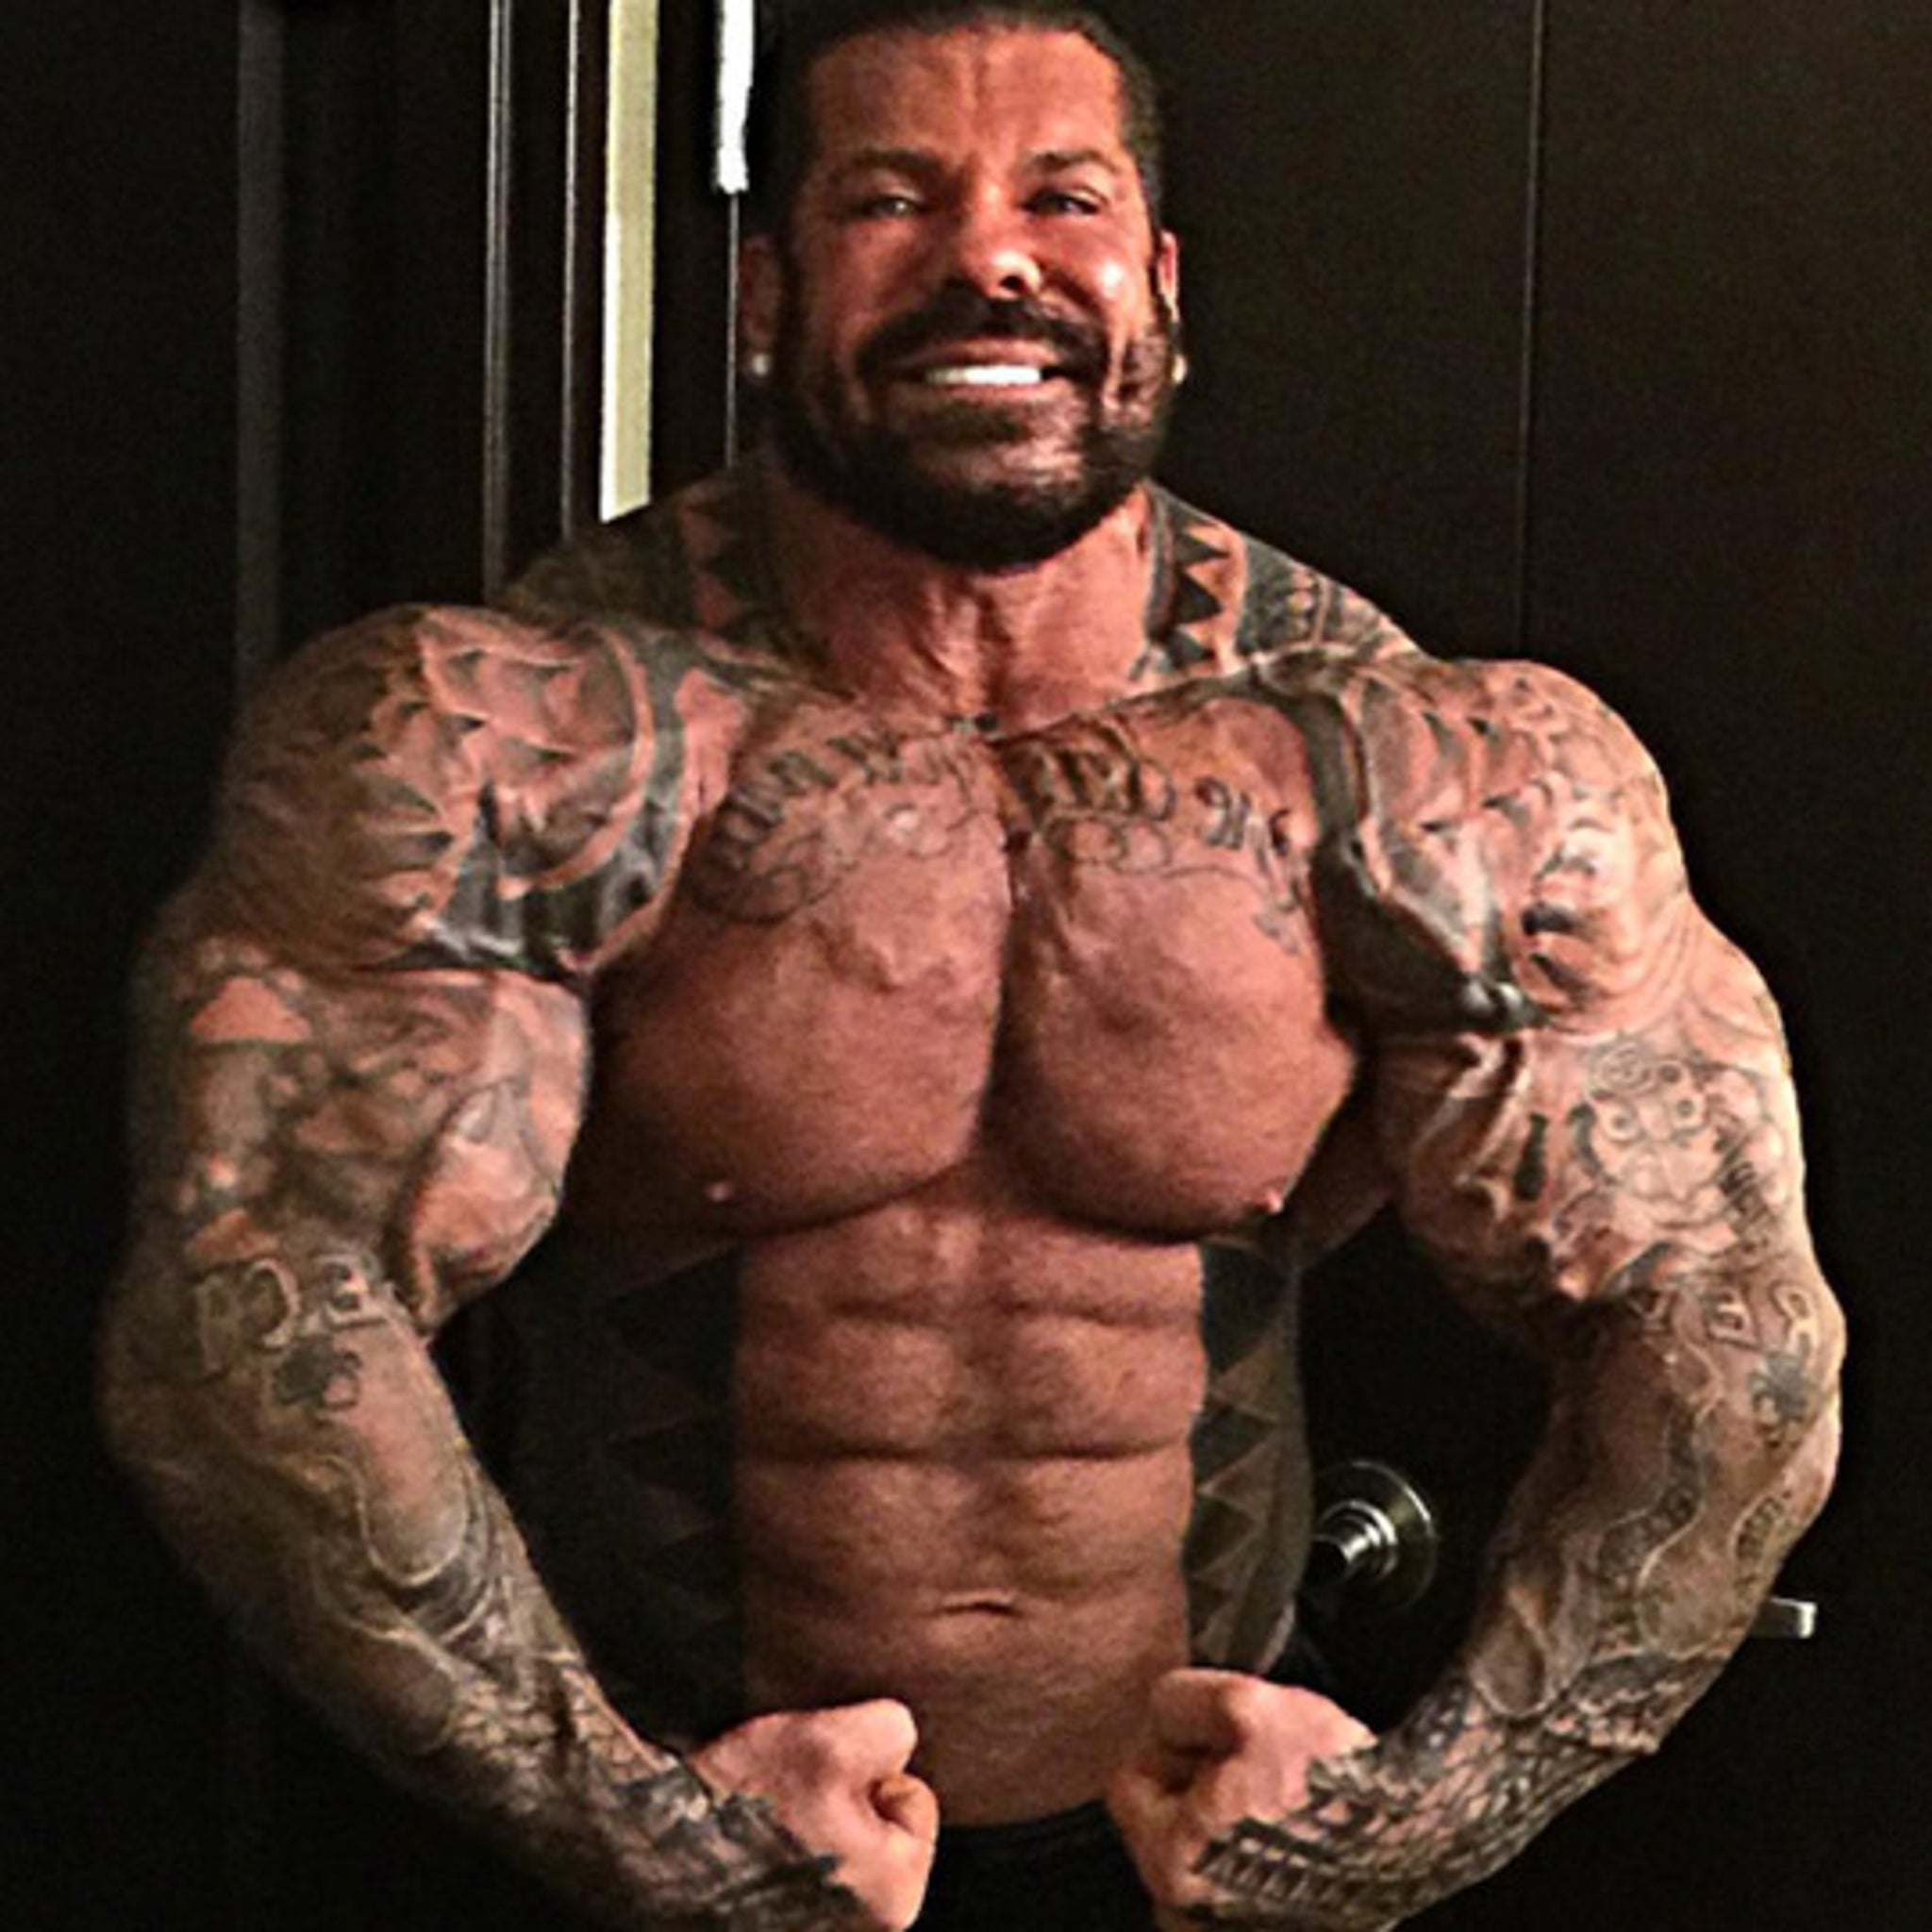 Bodybuilder Rich Piana Had 20 Bottles Of Steroids During Medical Images, Photos, Reviews